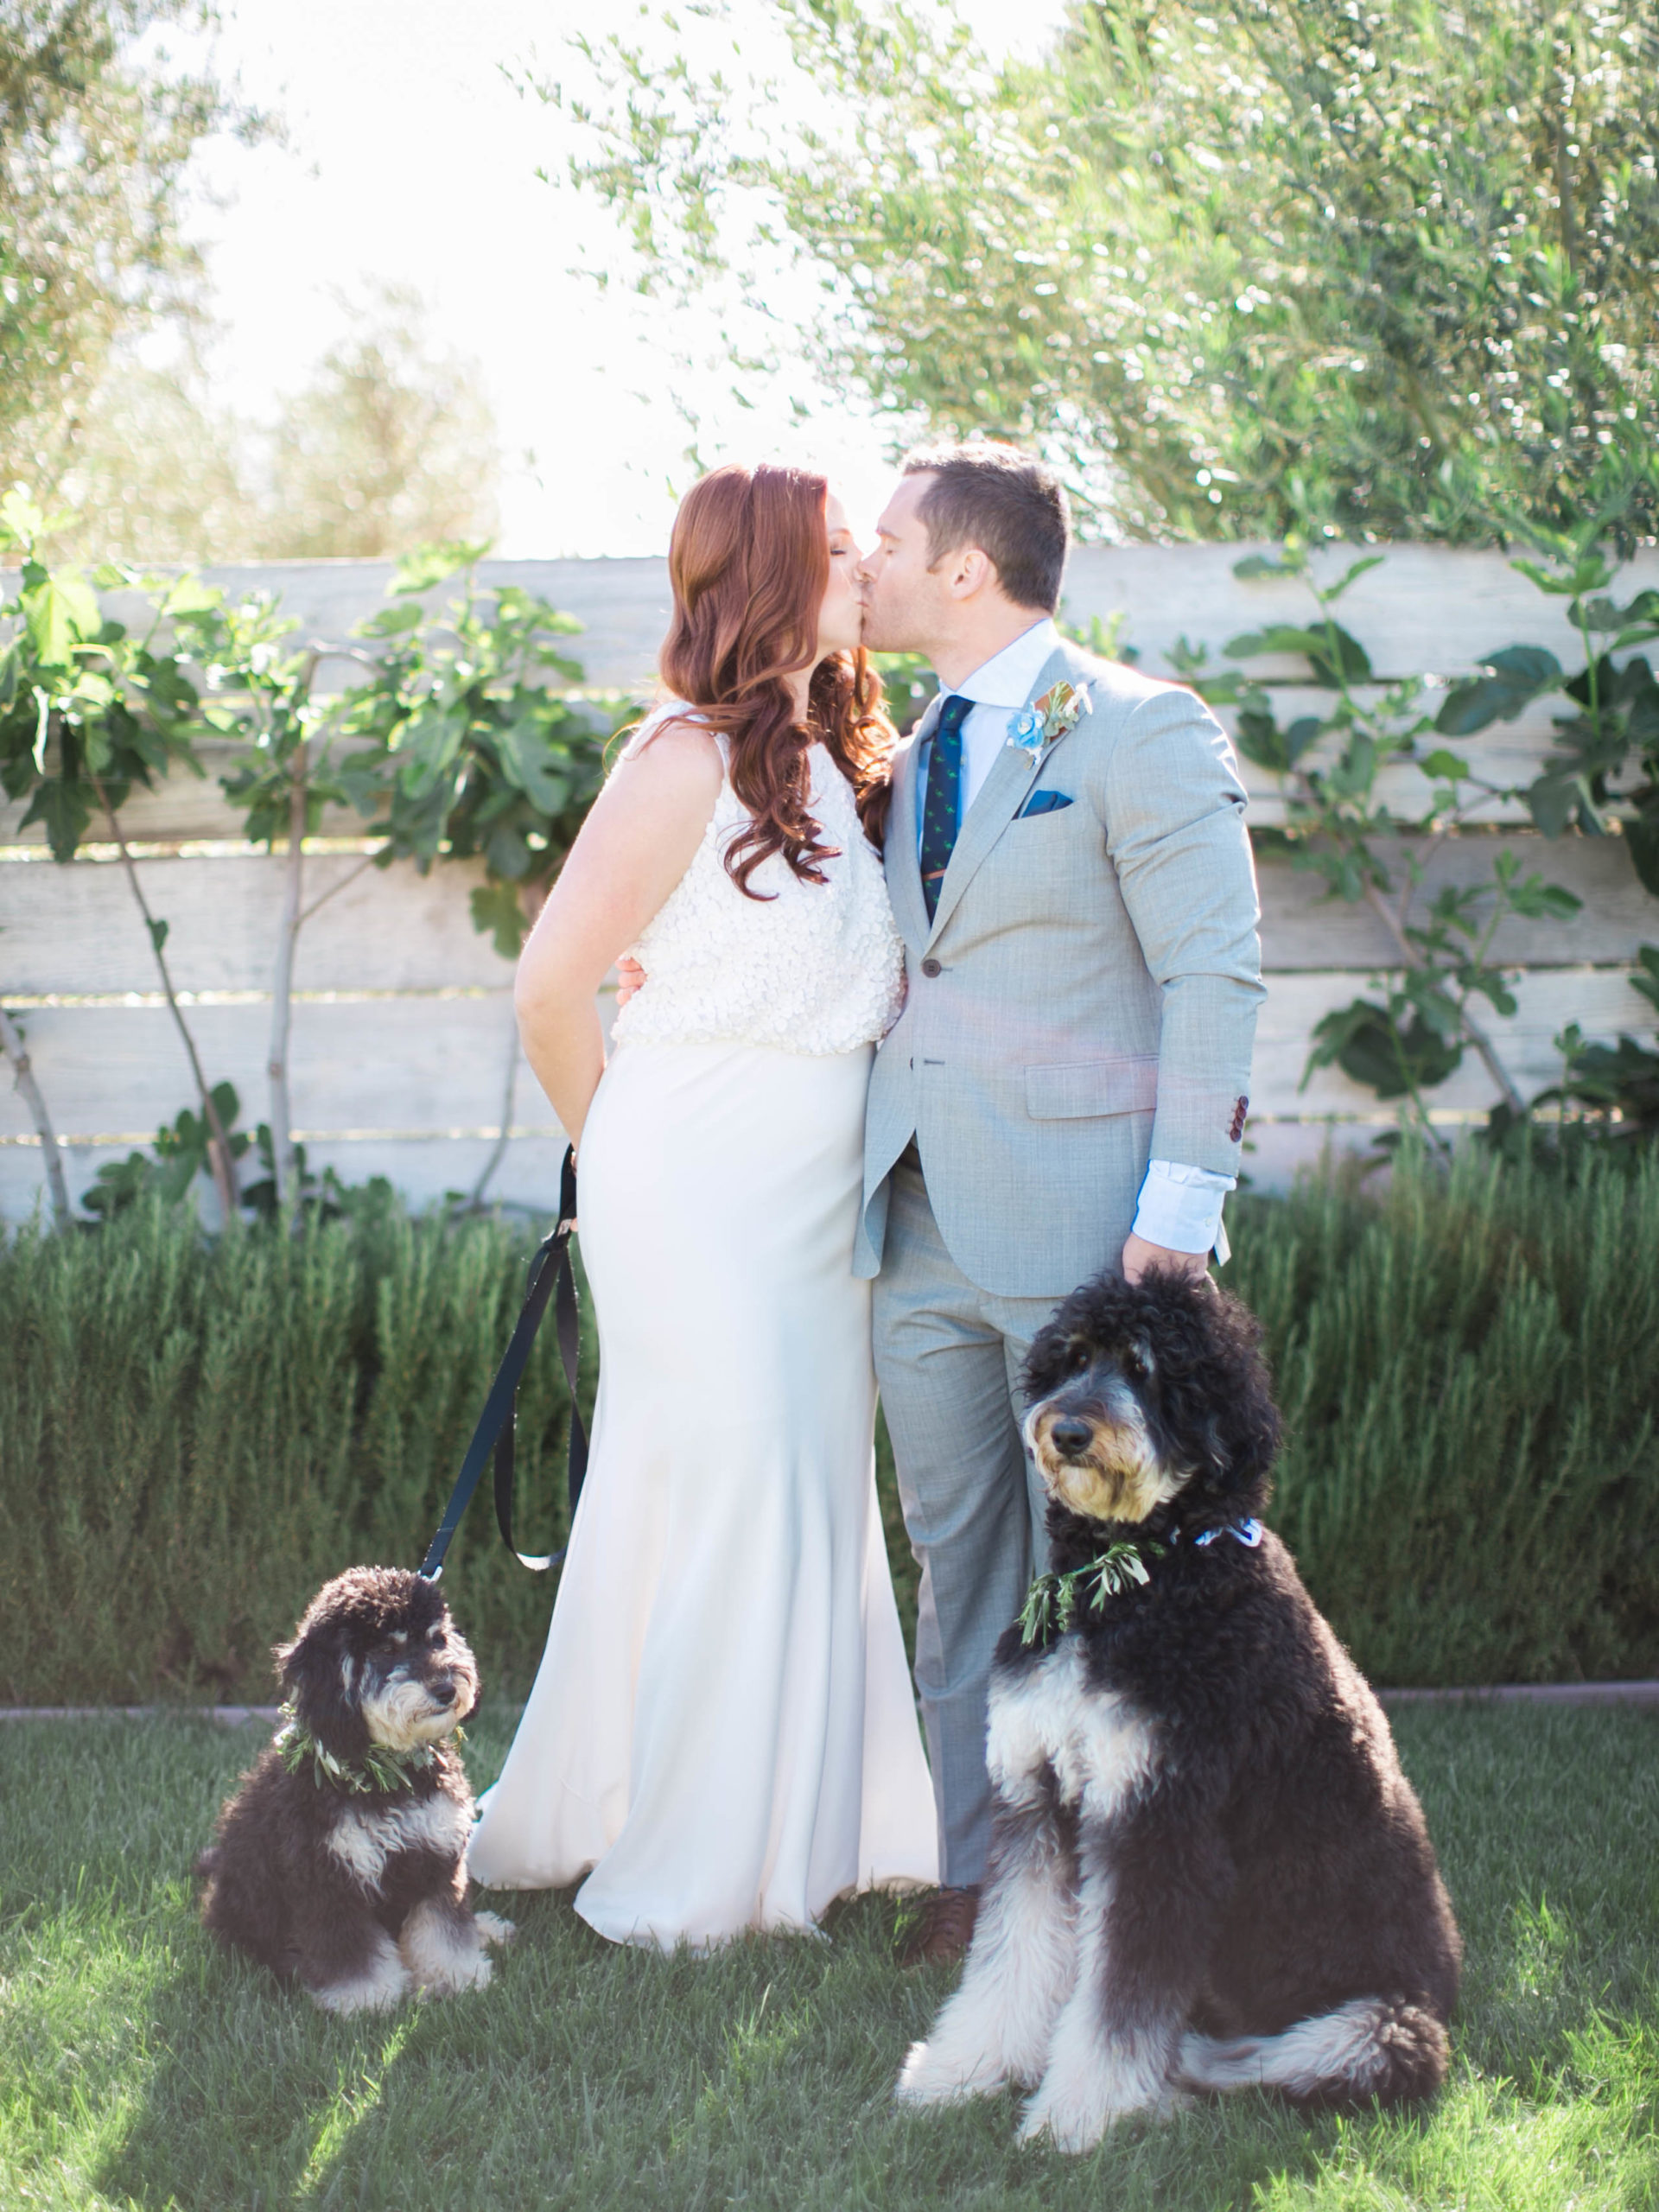  Couple sharing a kiss at their wedding with two dogs 